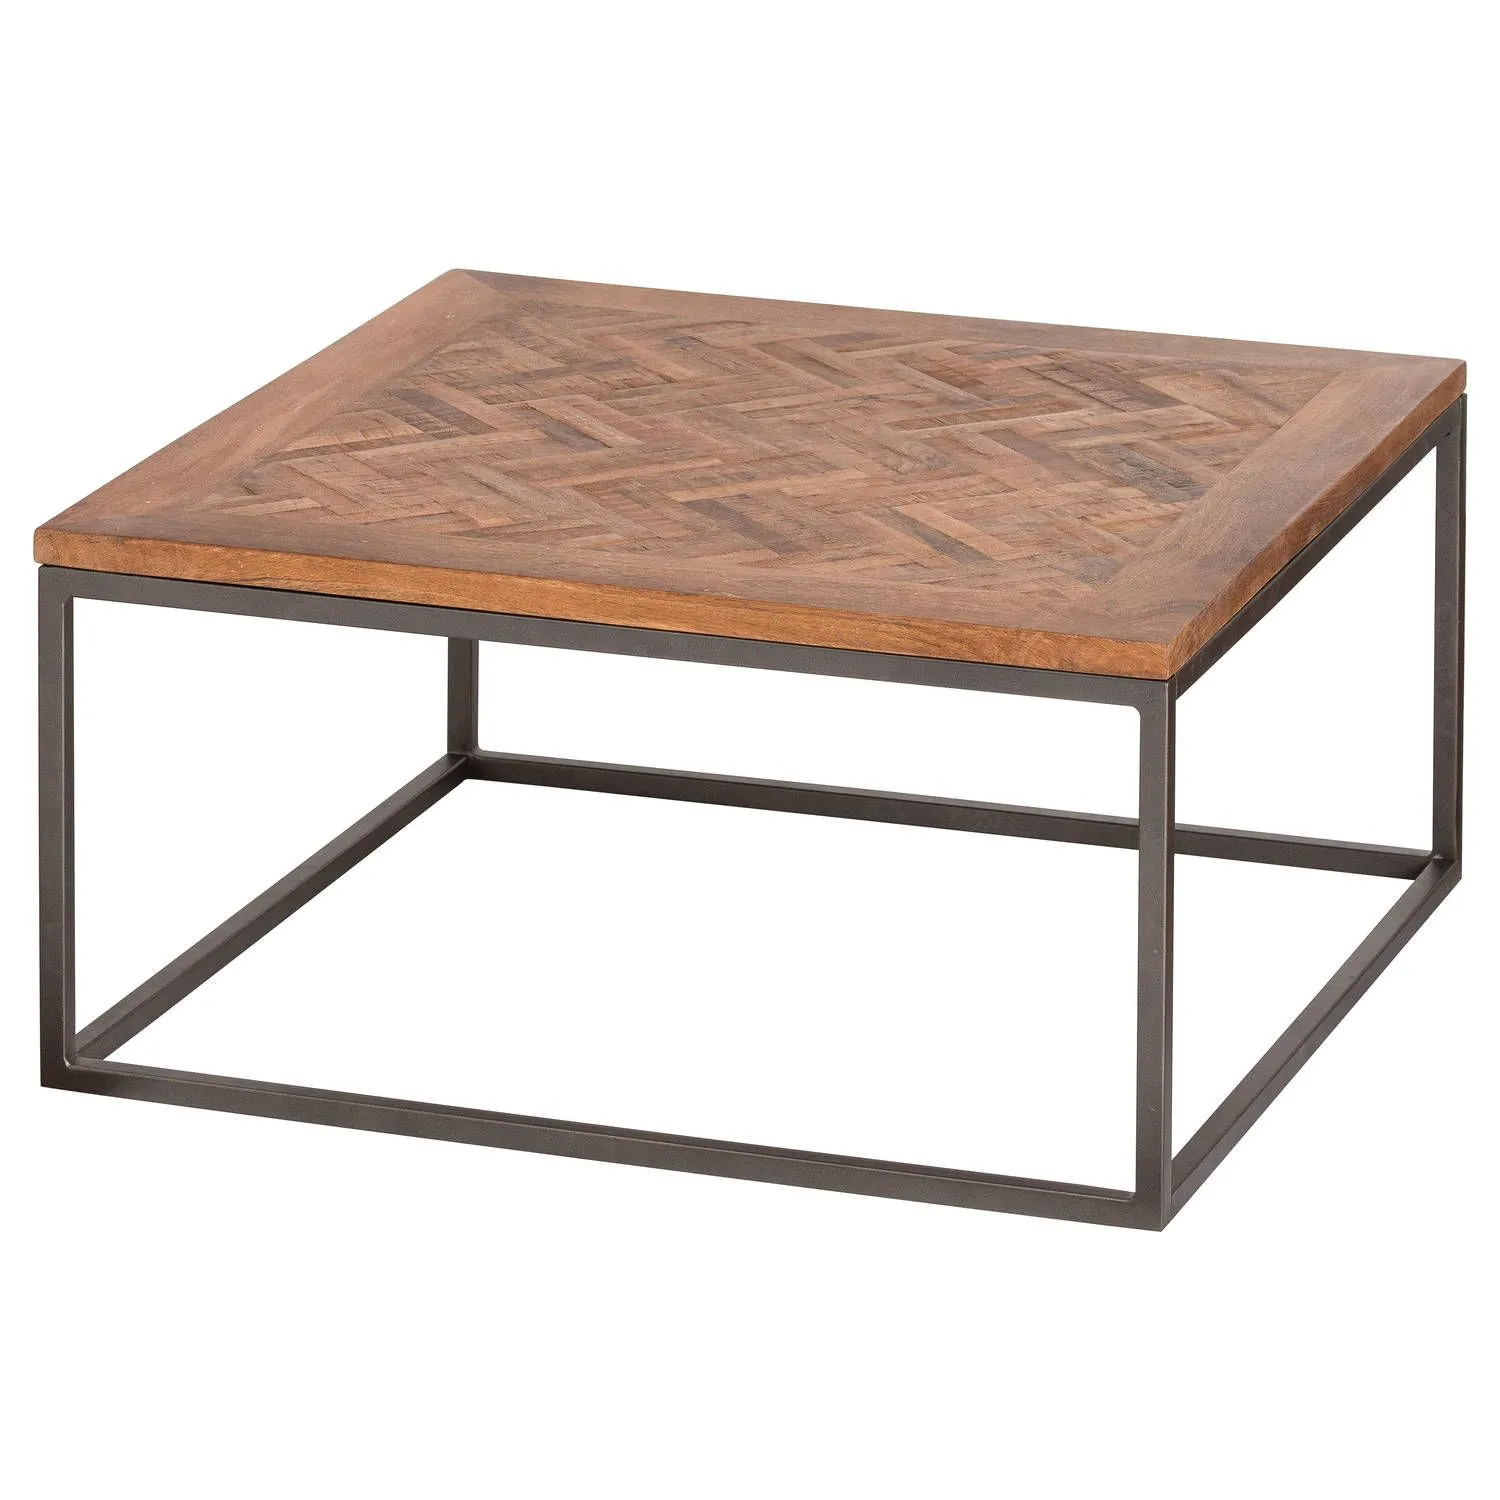 Hoxton Brown Acacia Wood Parquet Top Square Coffee Table On Black Metal Legs